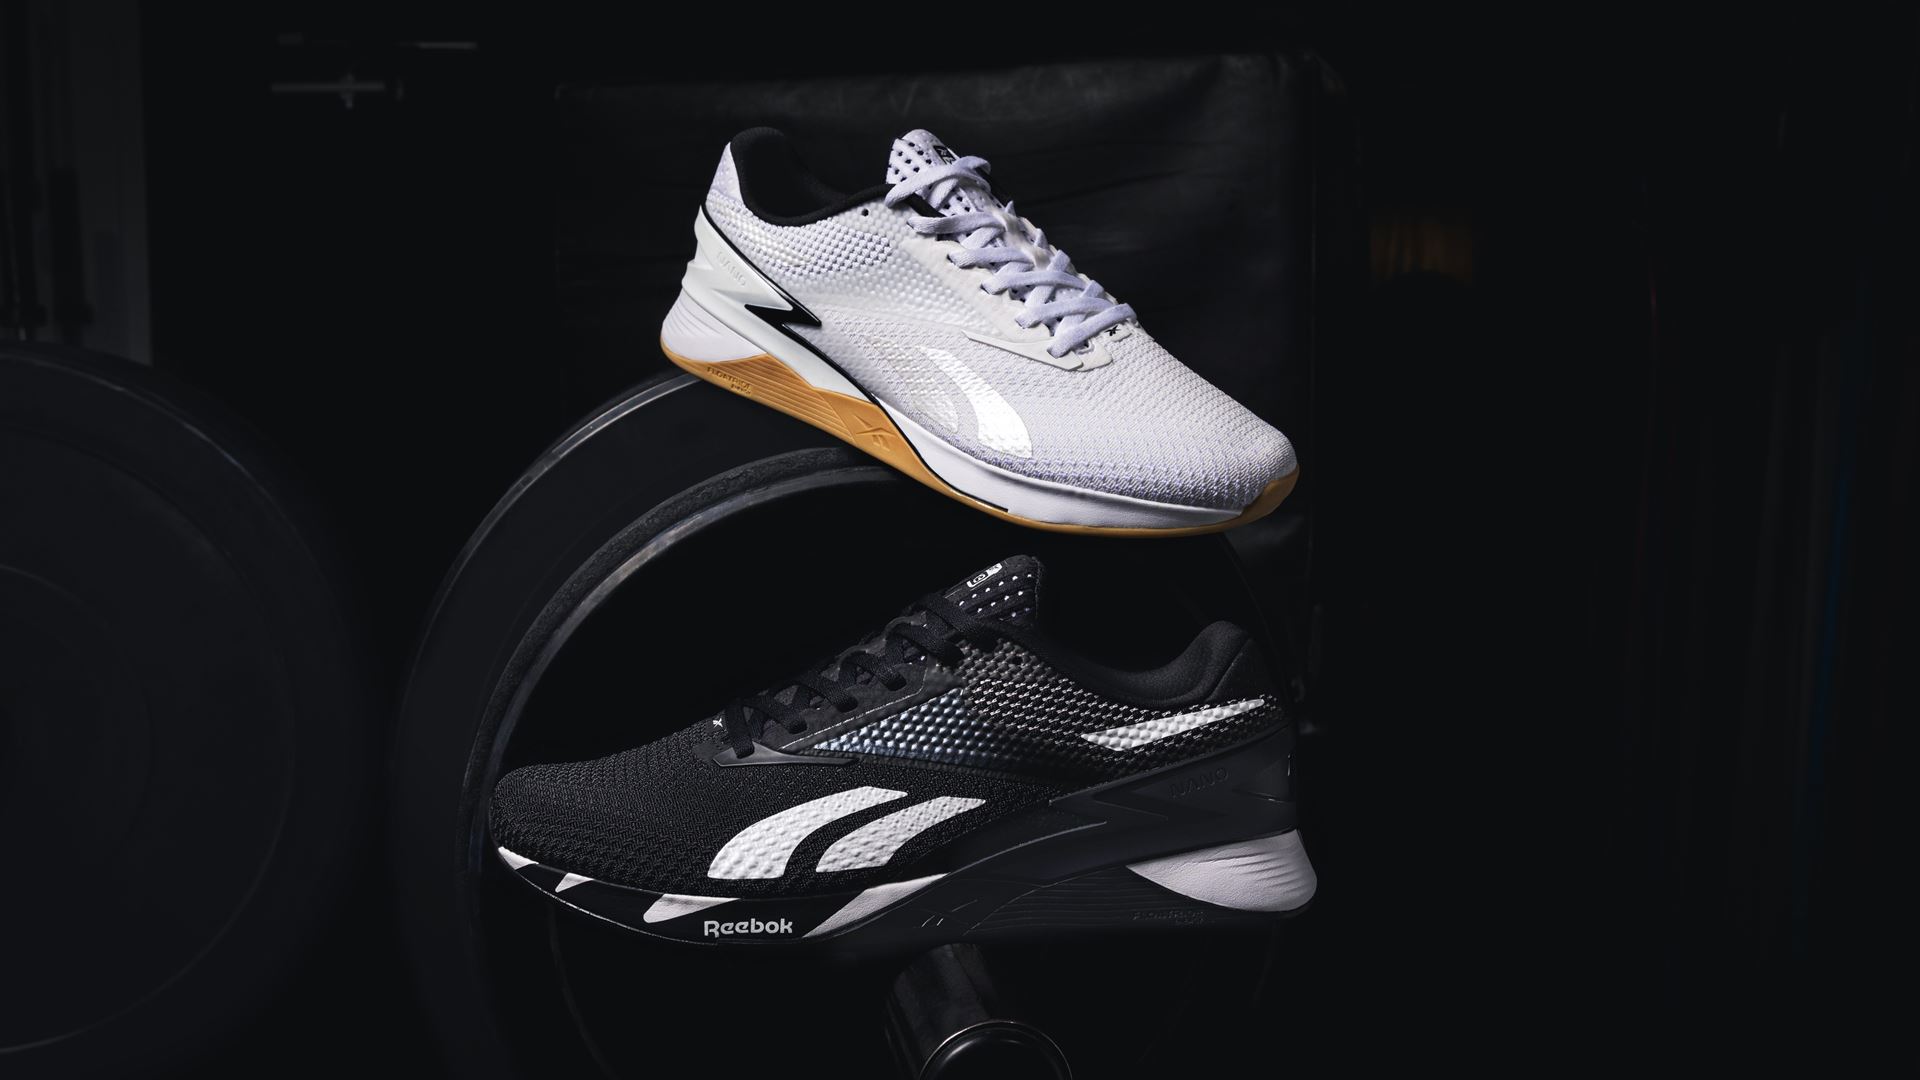 Reebok News Stream : Reebok Unveils the Latest Iteration of the Official Shoe Fitness: The Nano X3